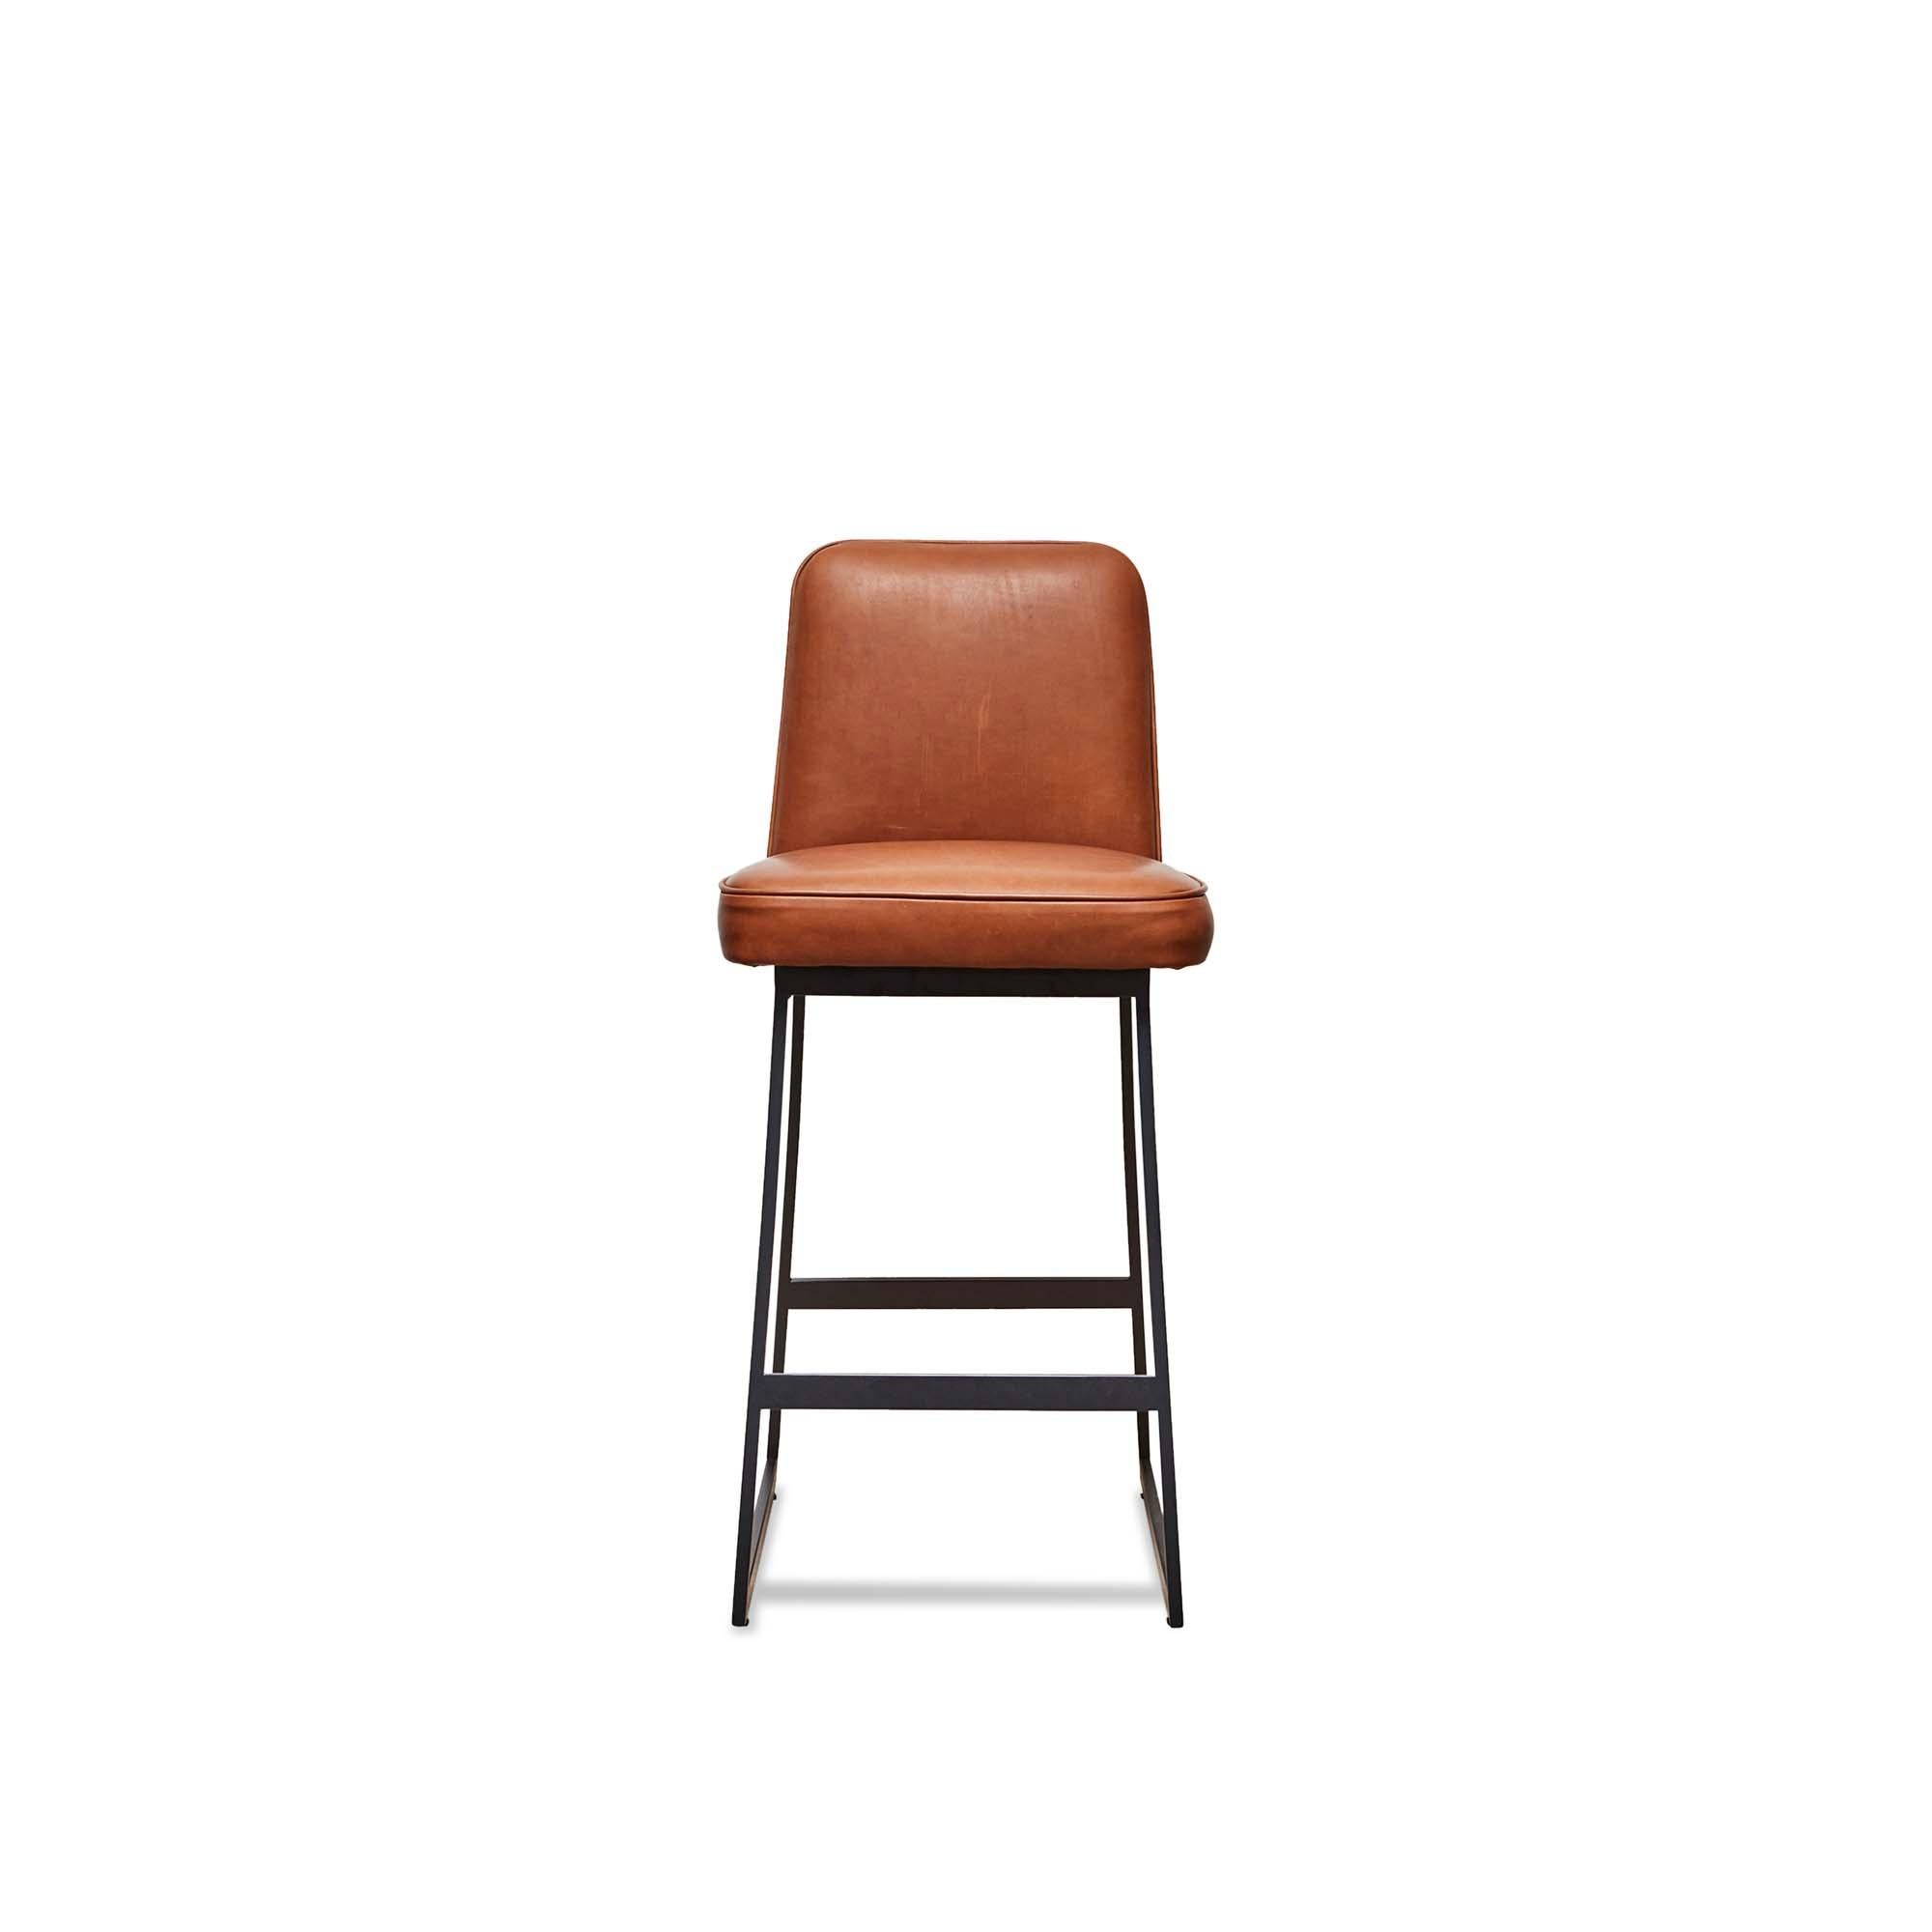 The Elysian Barstool is a modern take on the classic stool. Available to order in counter height. 

The Lawson-Fenning Collection is designed and handmade in Los Angeles, California. Reach out to discover what options are currently in stock.